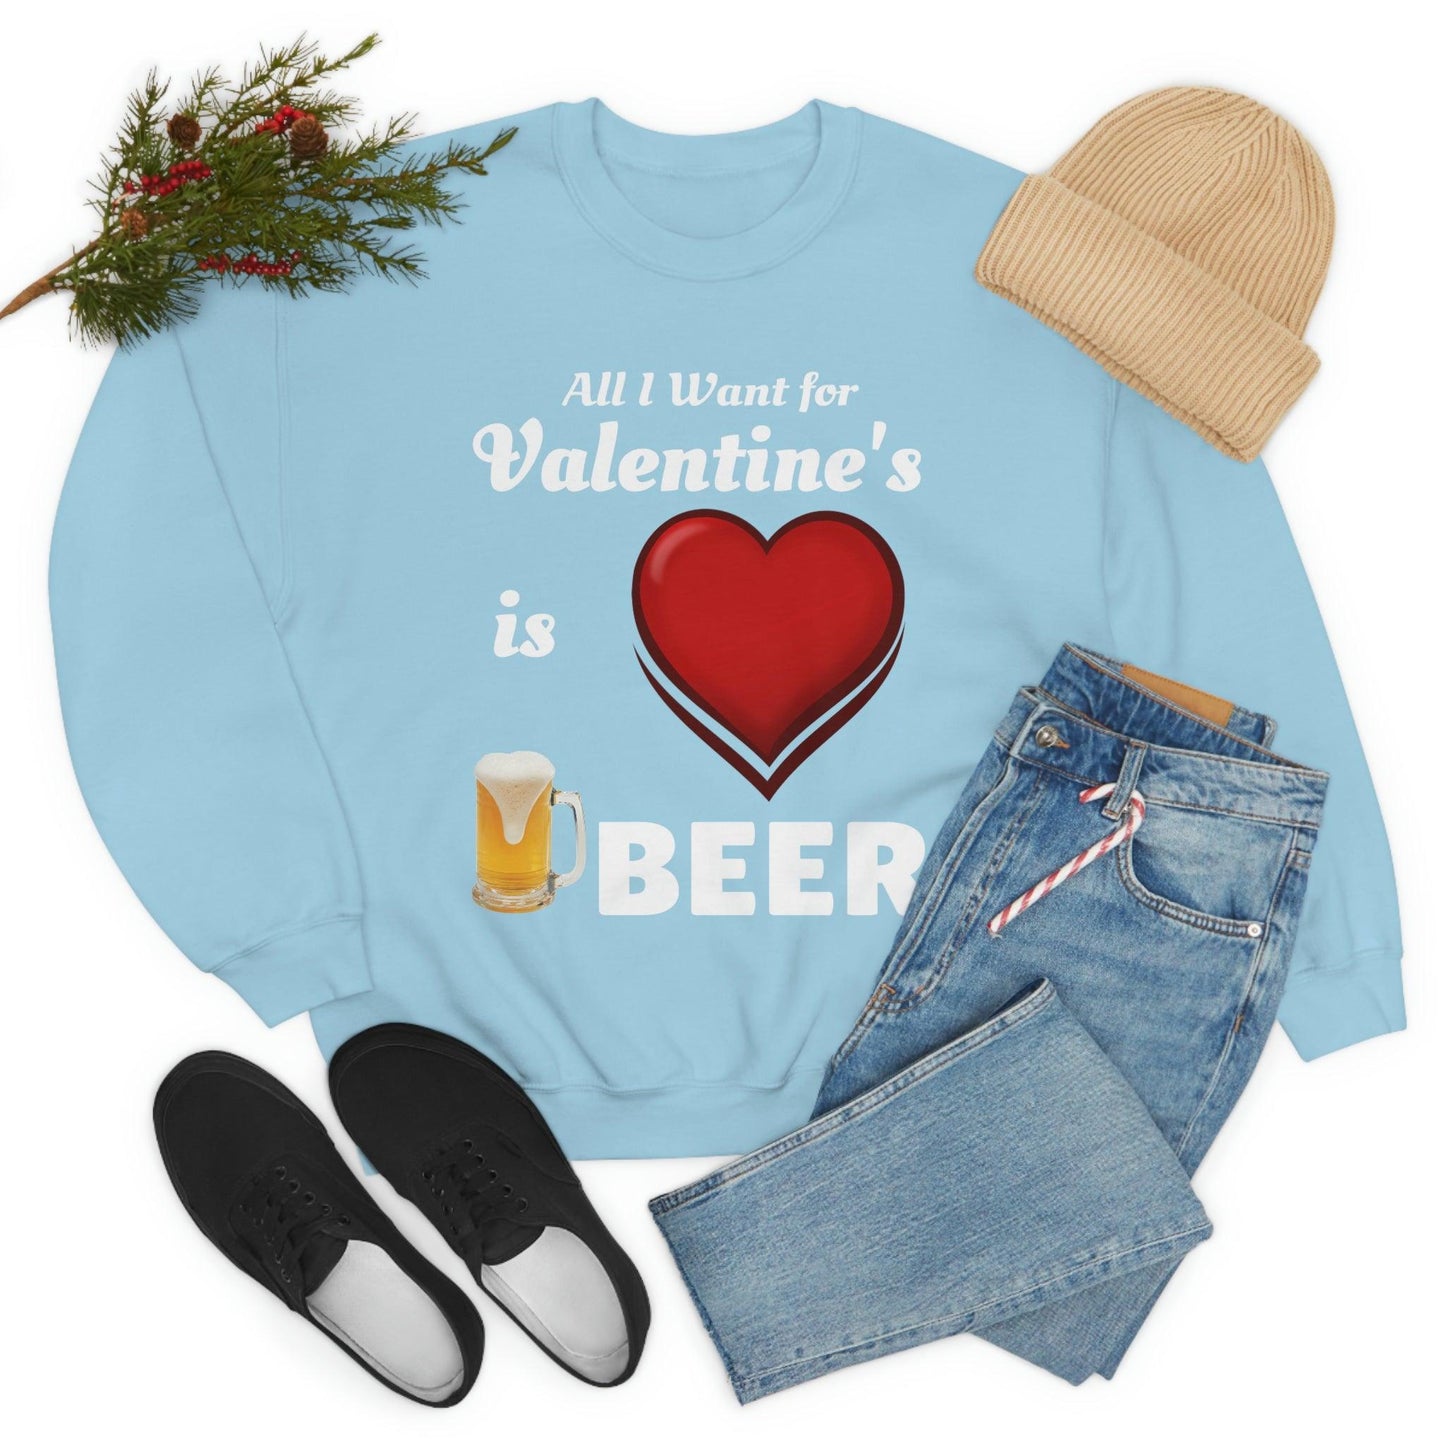 All I want for Valentine's is Beer Sweatshirt